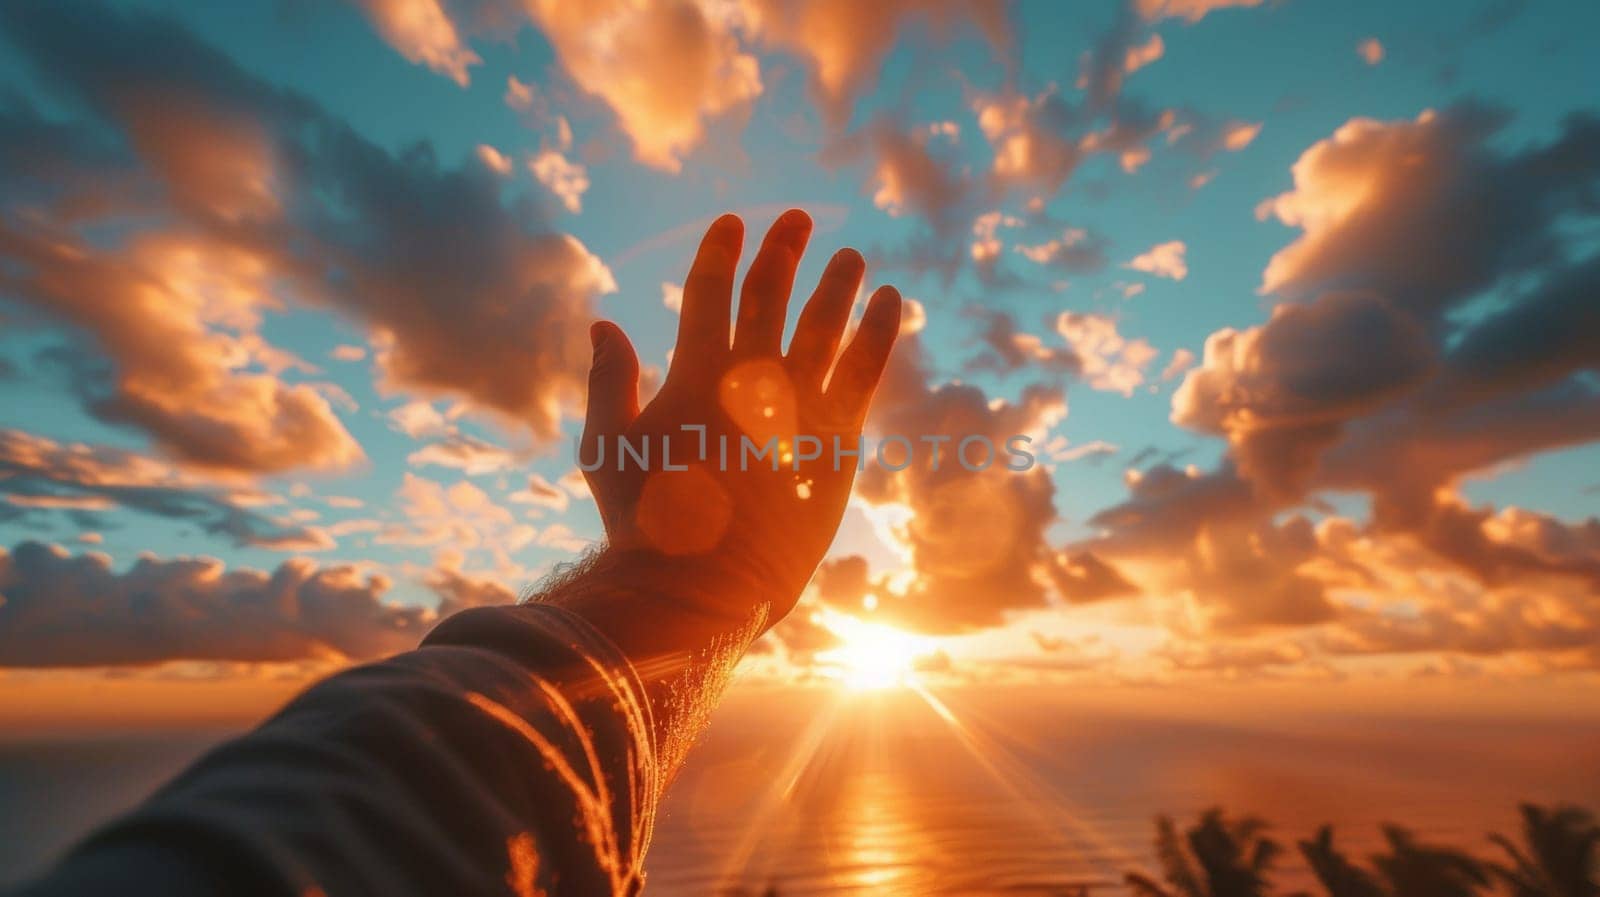 A person reaching out to the sun with their hand